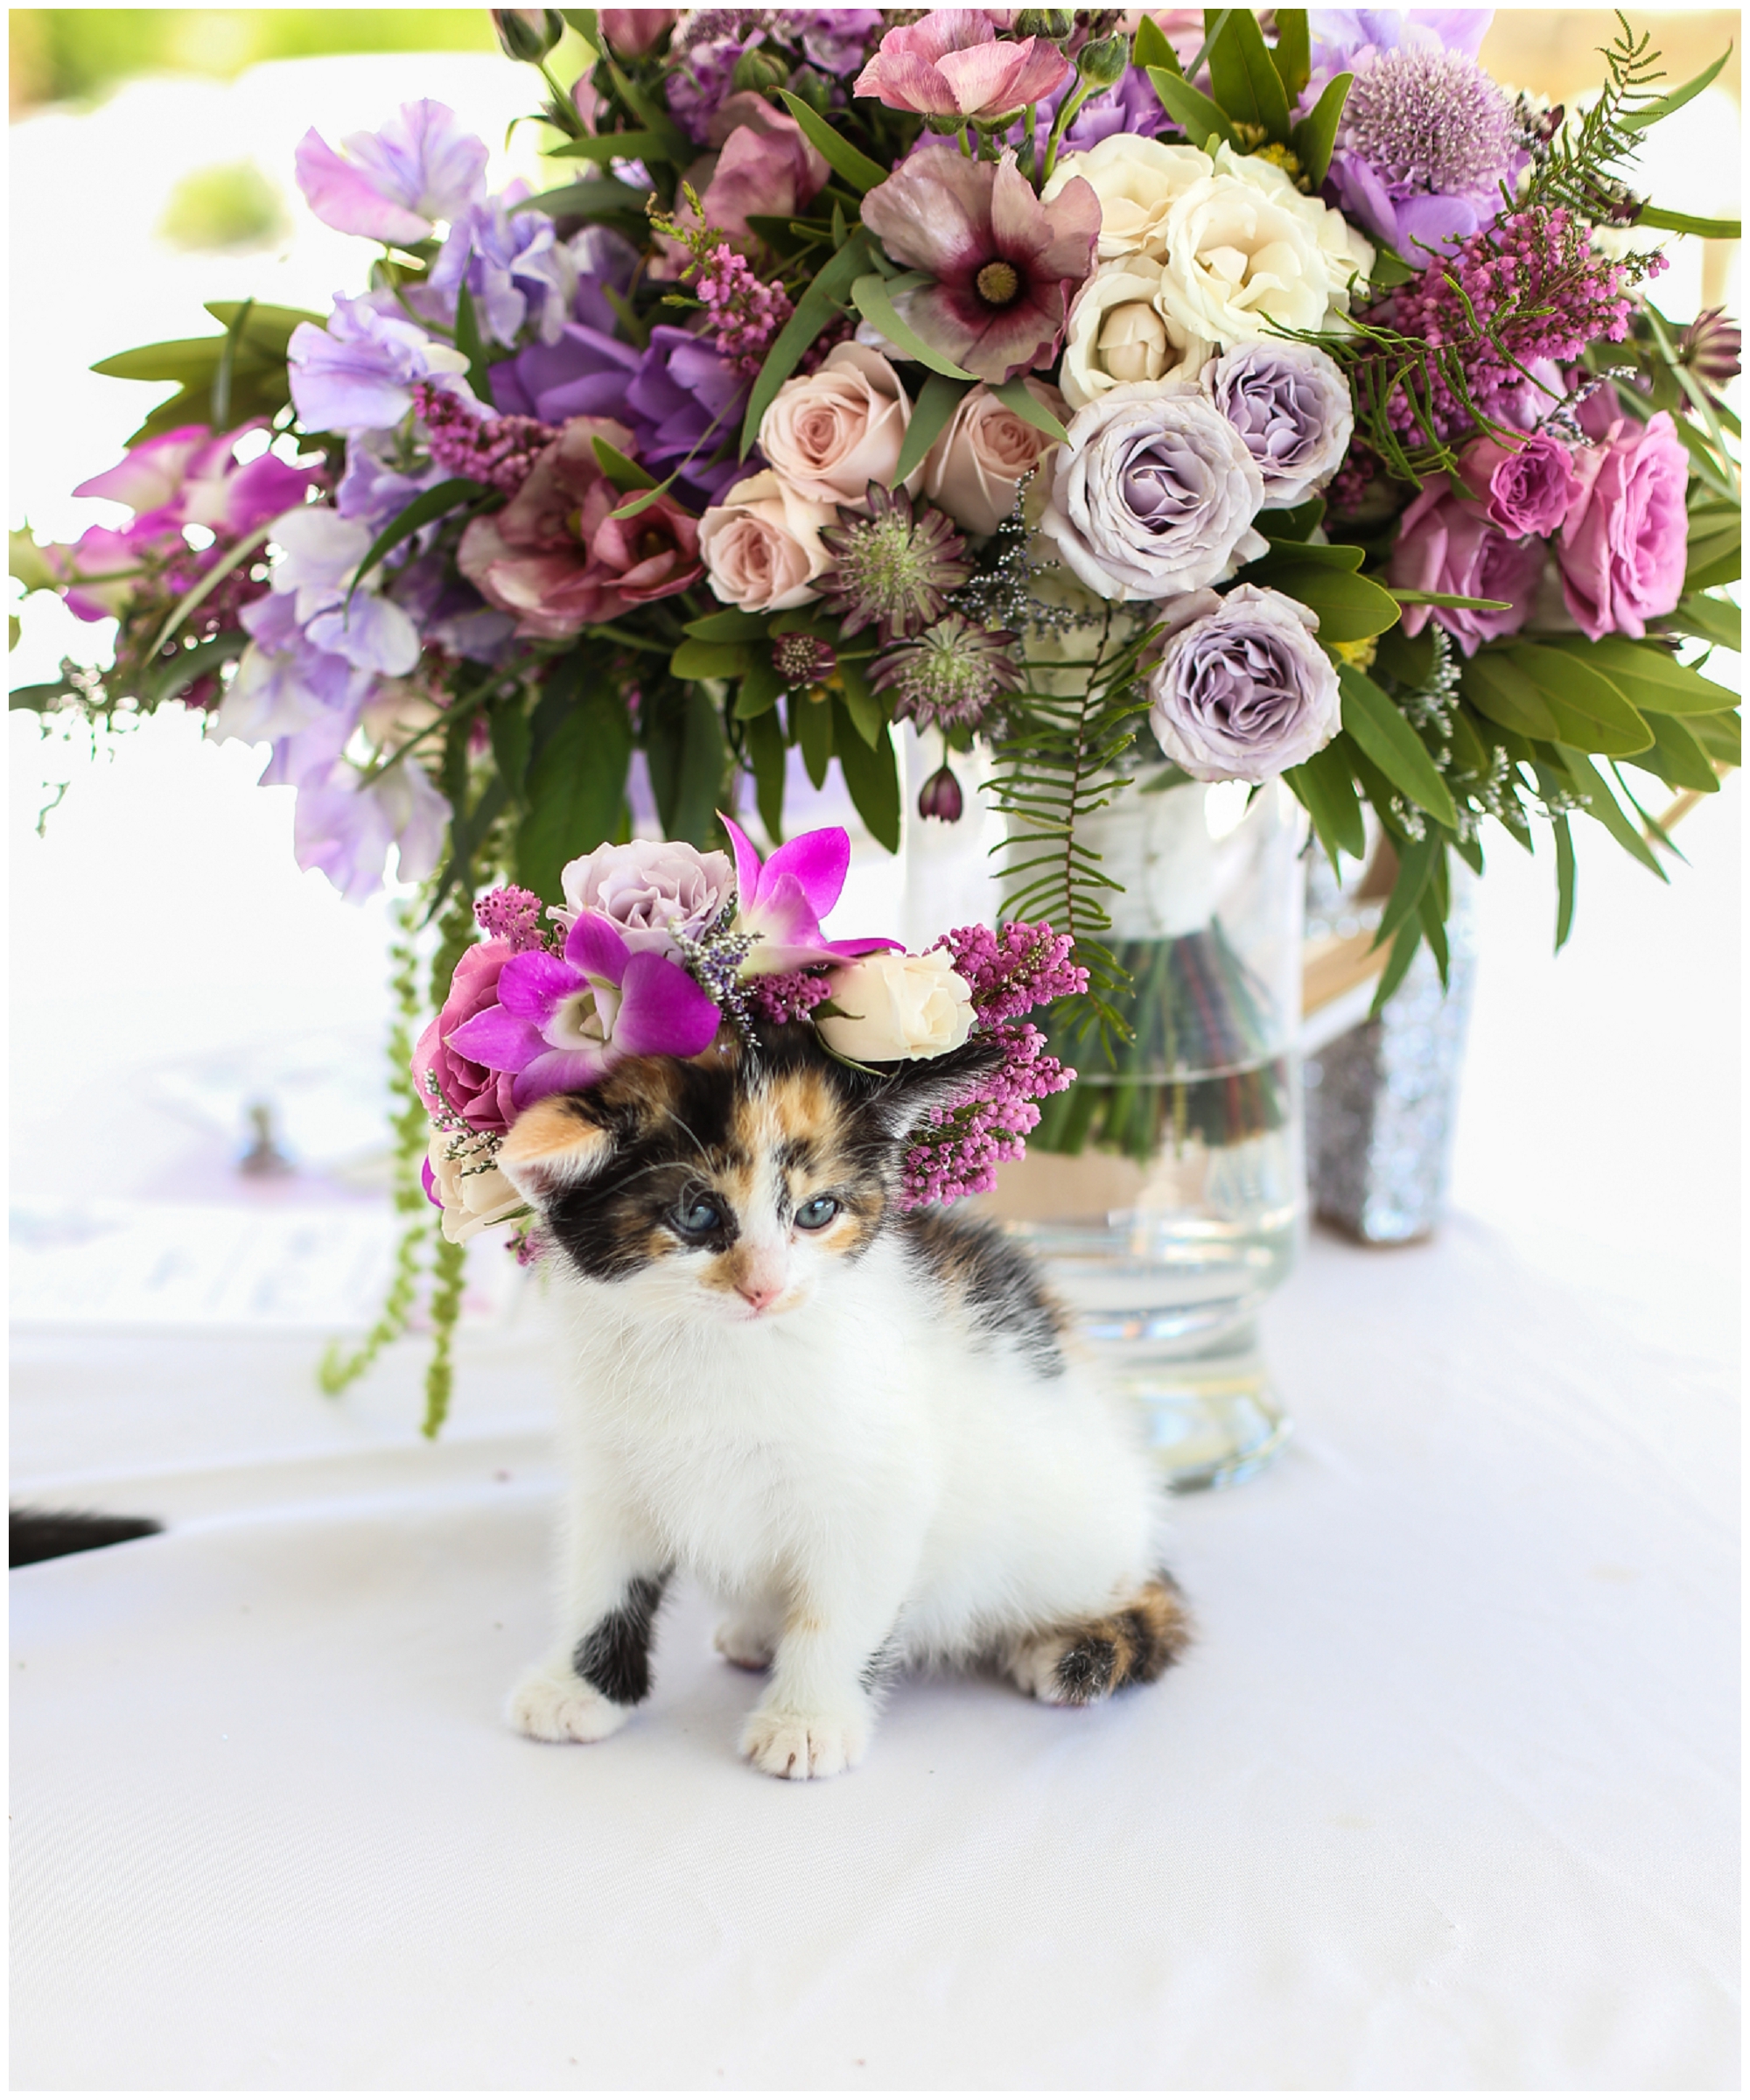 Wedding Day Timeline and Tips - Kansas City Wedding Photographer - Legacy at Green Hills - Mariam Saifan Photography - Best Wedding Photographer - Eighteen Ninety - 1890 Wedding Platte City Wedding - Adorable Kitten Cat at Wedding - Flower Crown - D and R Floral Design